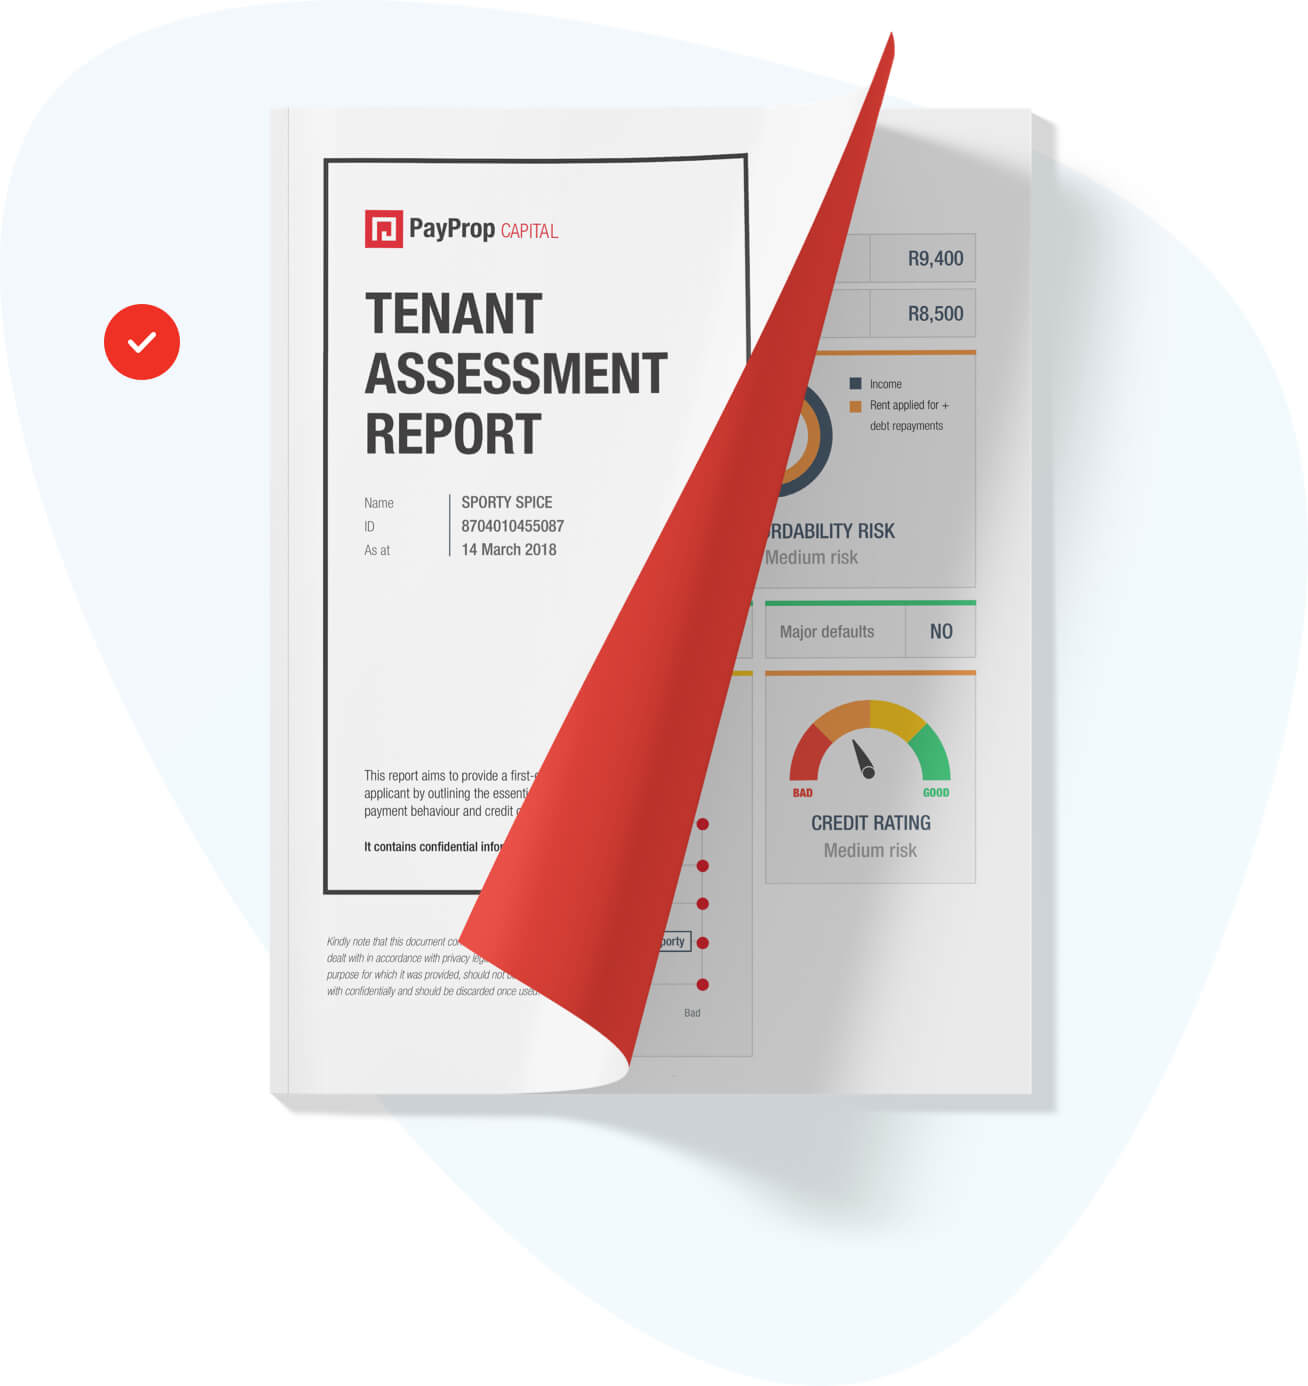 Tenant Assessment Report feature